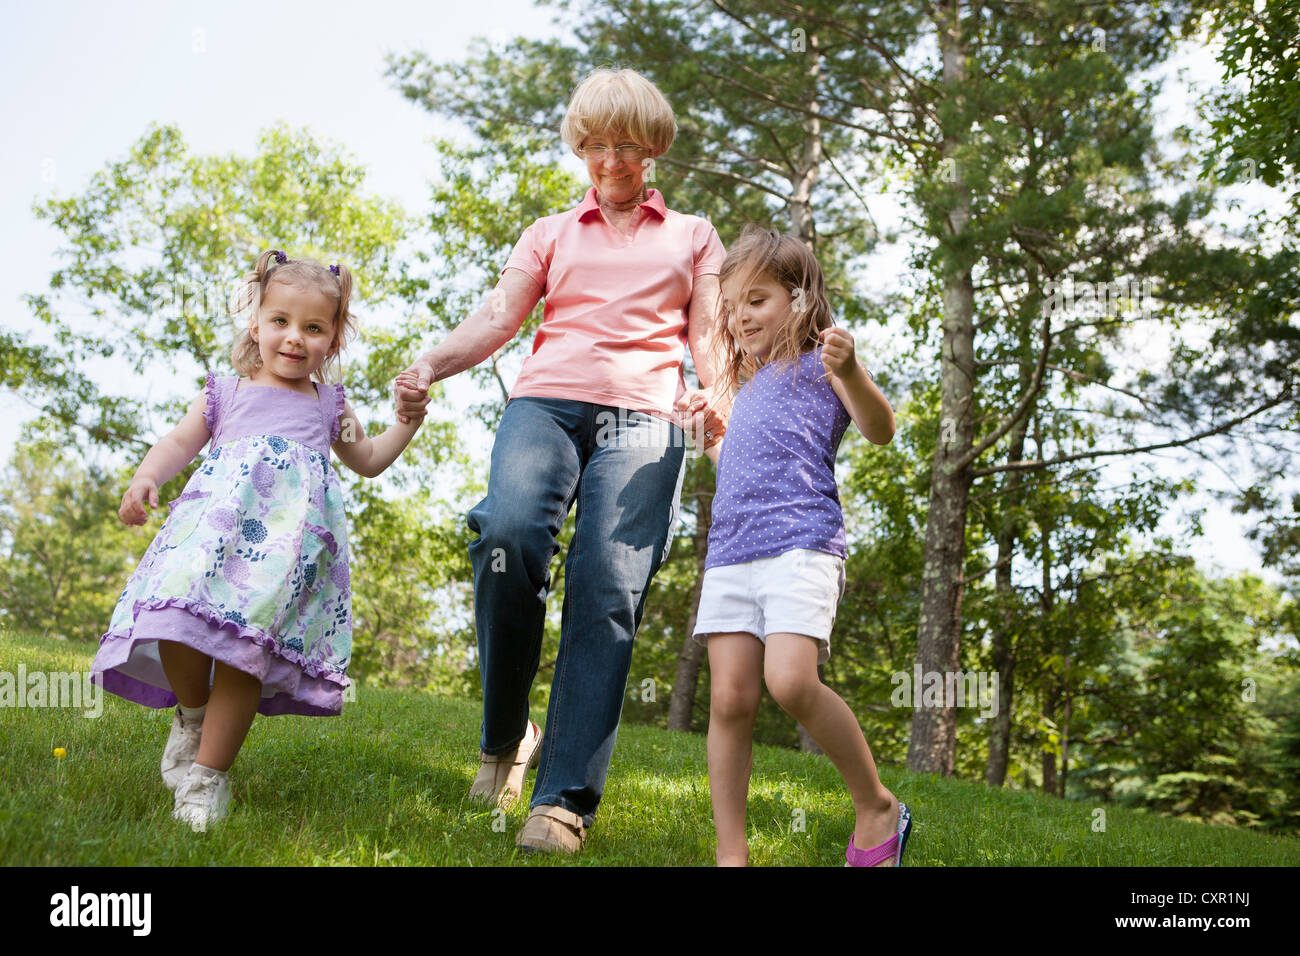 Grandmother and granddaughters holding hands Stock Photo